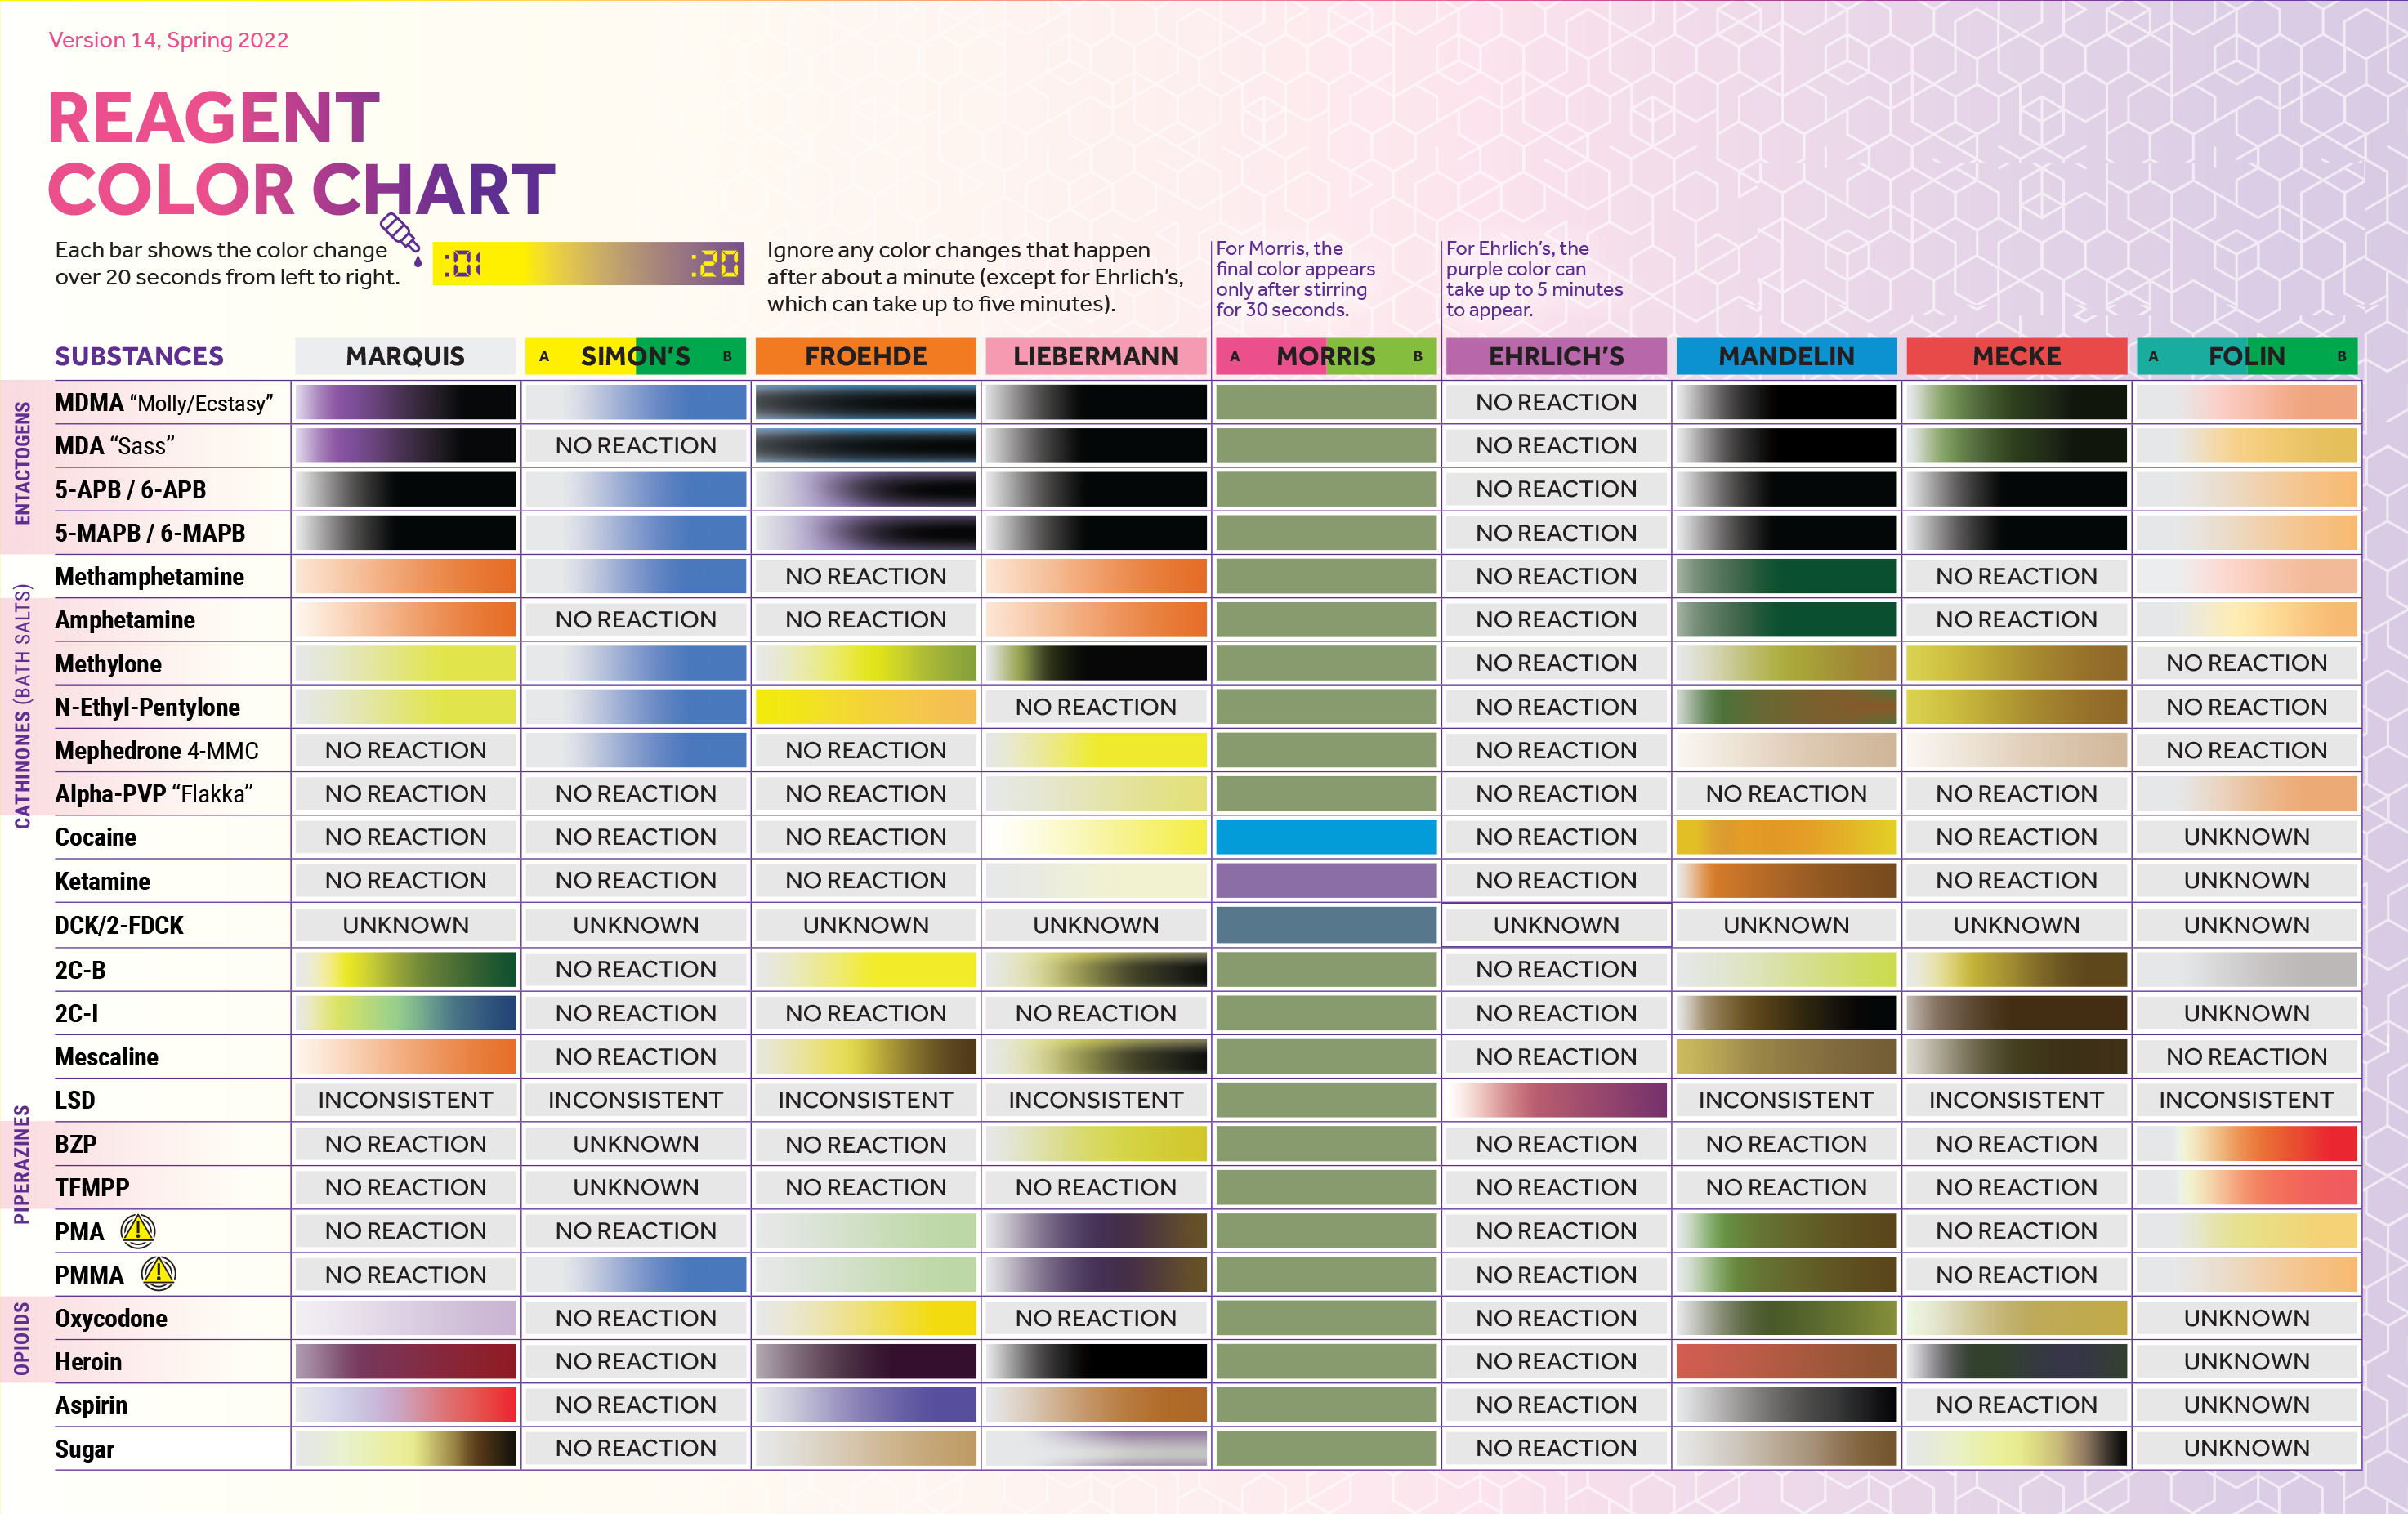 A graphic of the DanceSafe color chart, showing reactions for about 20 drugs with all nine DanceSafe reagents.